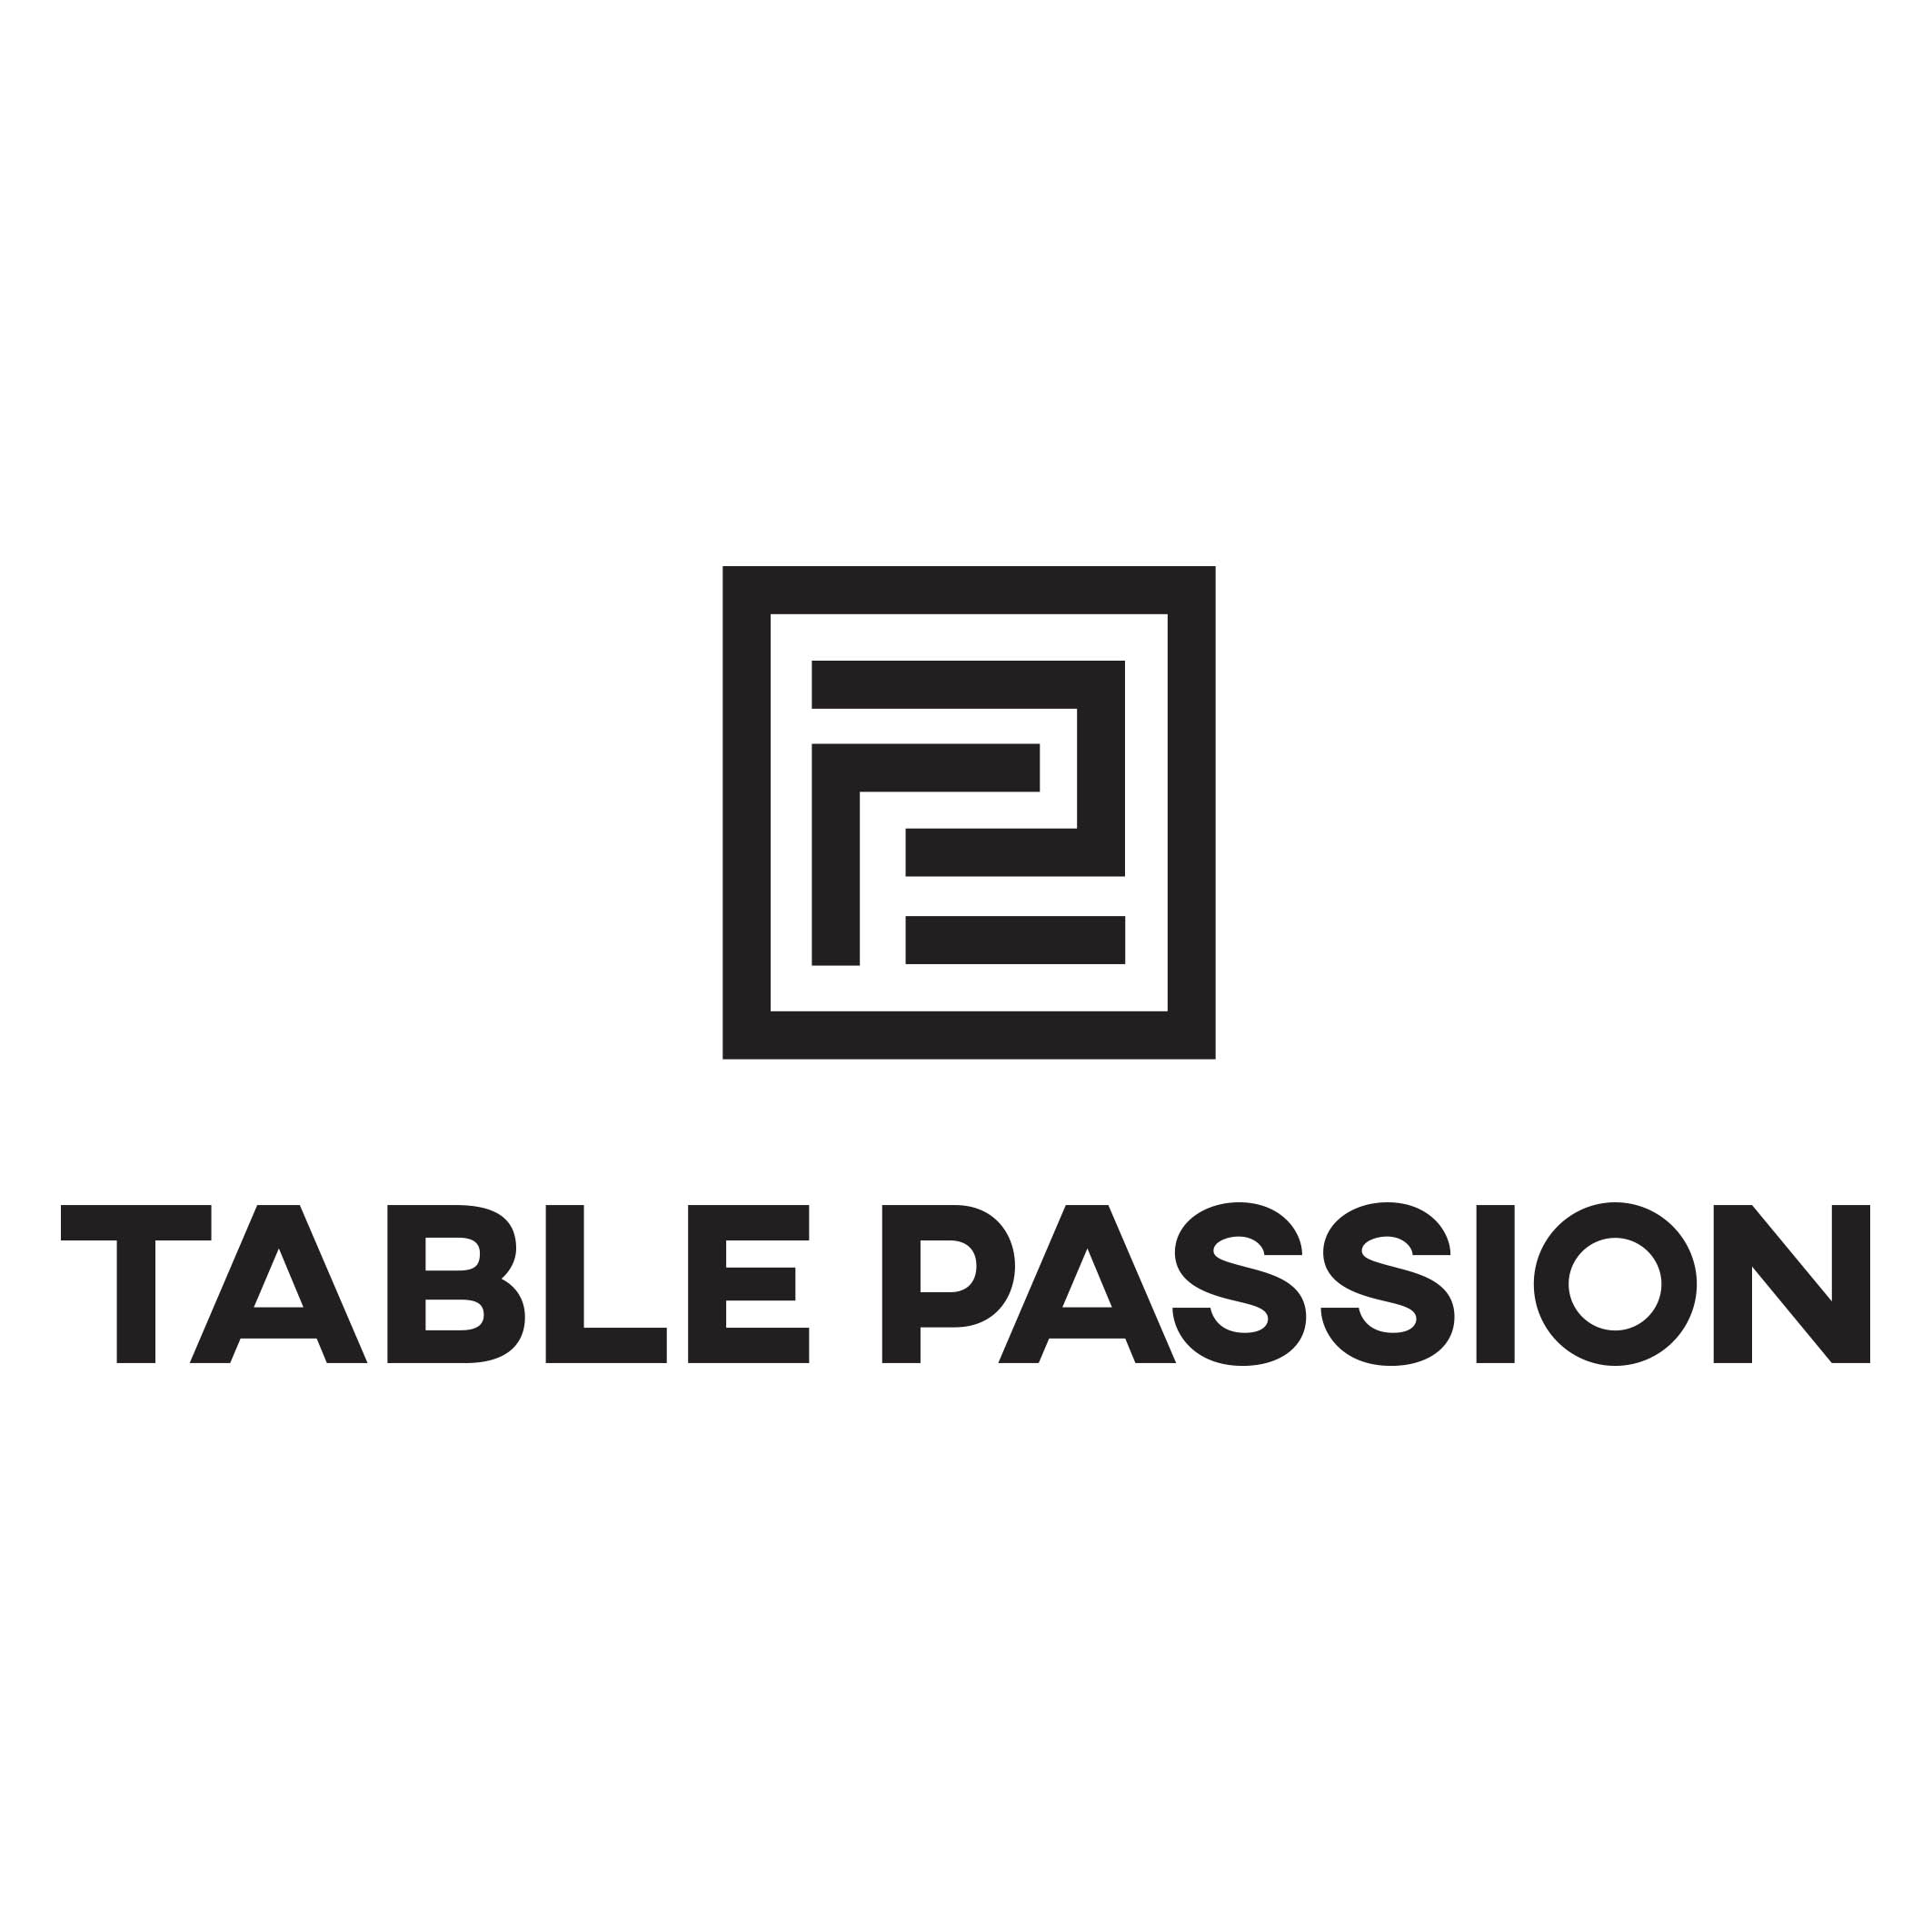 LOGO TABLE PASSION